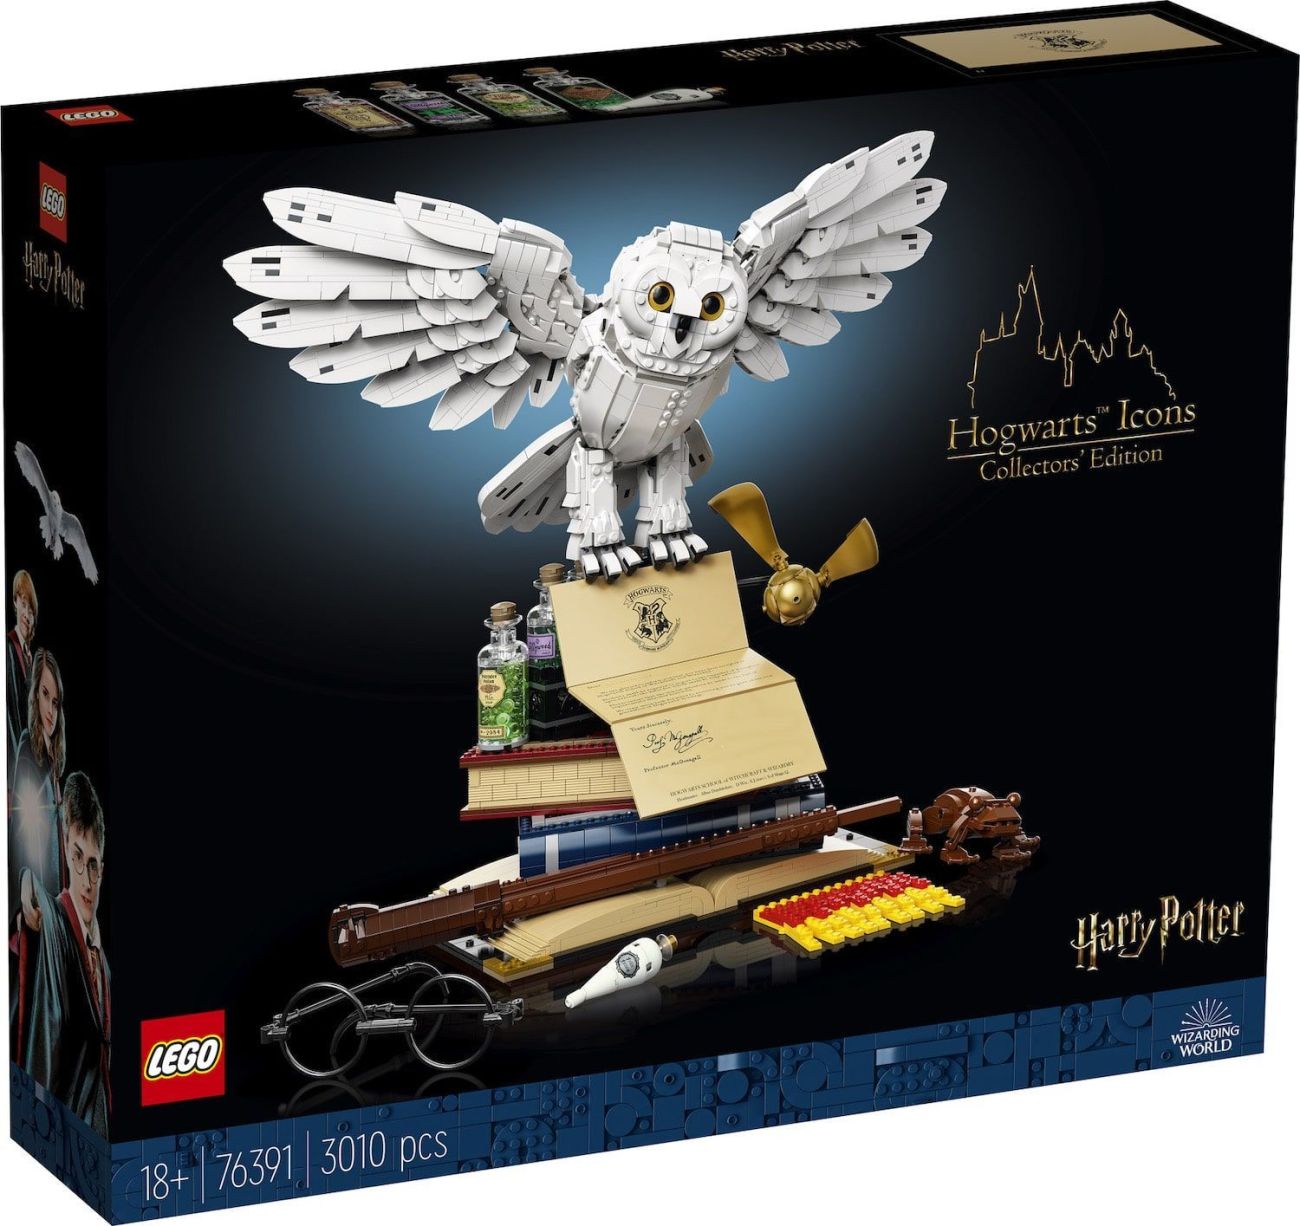 LEGO 76391 Hogwarts Icons Collectors Edition